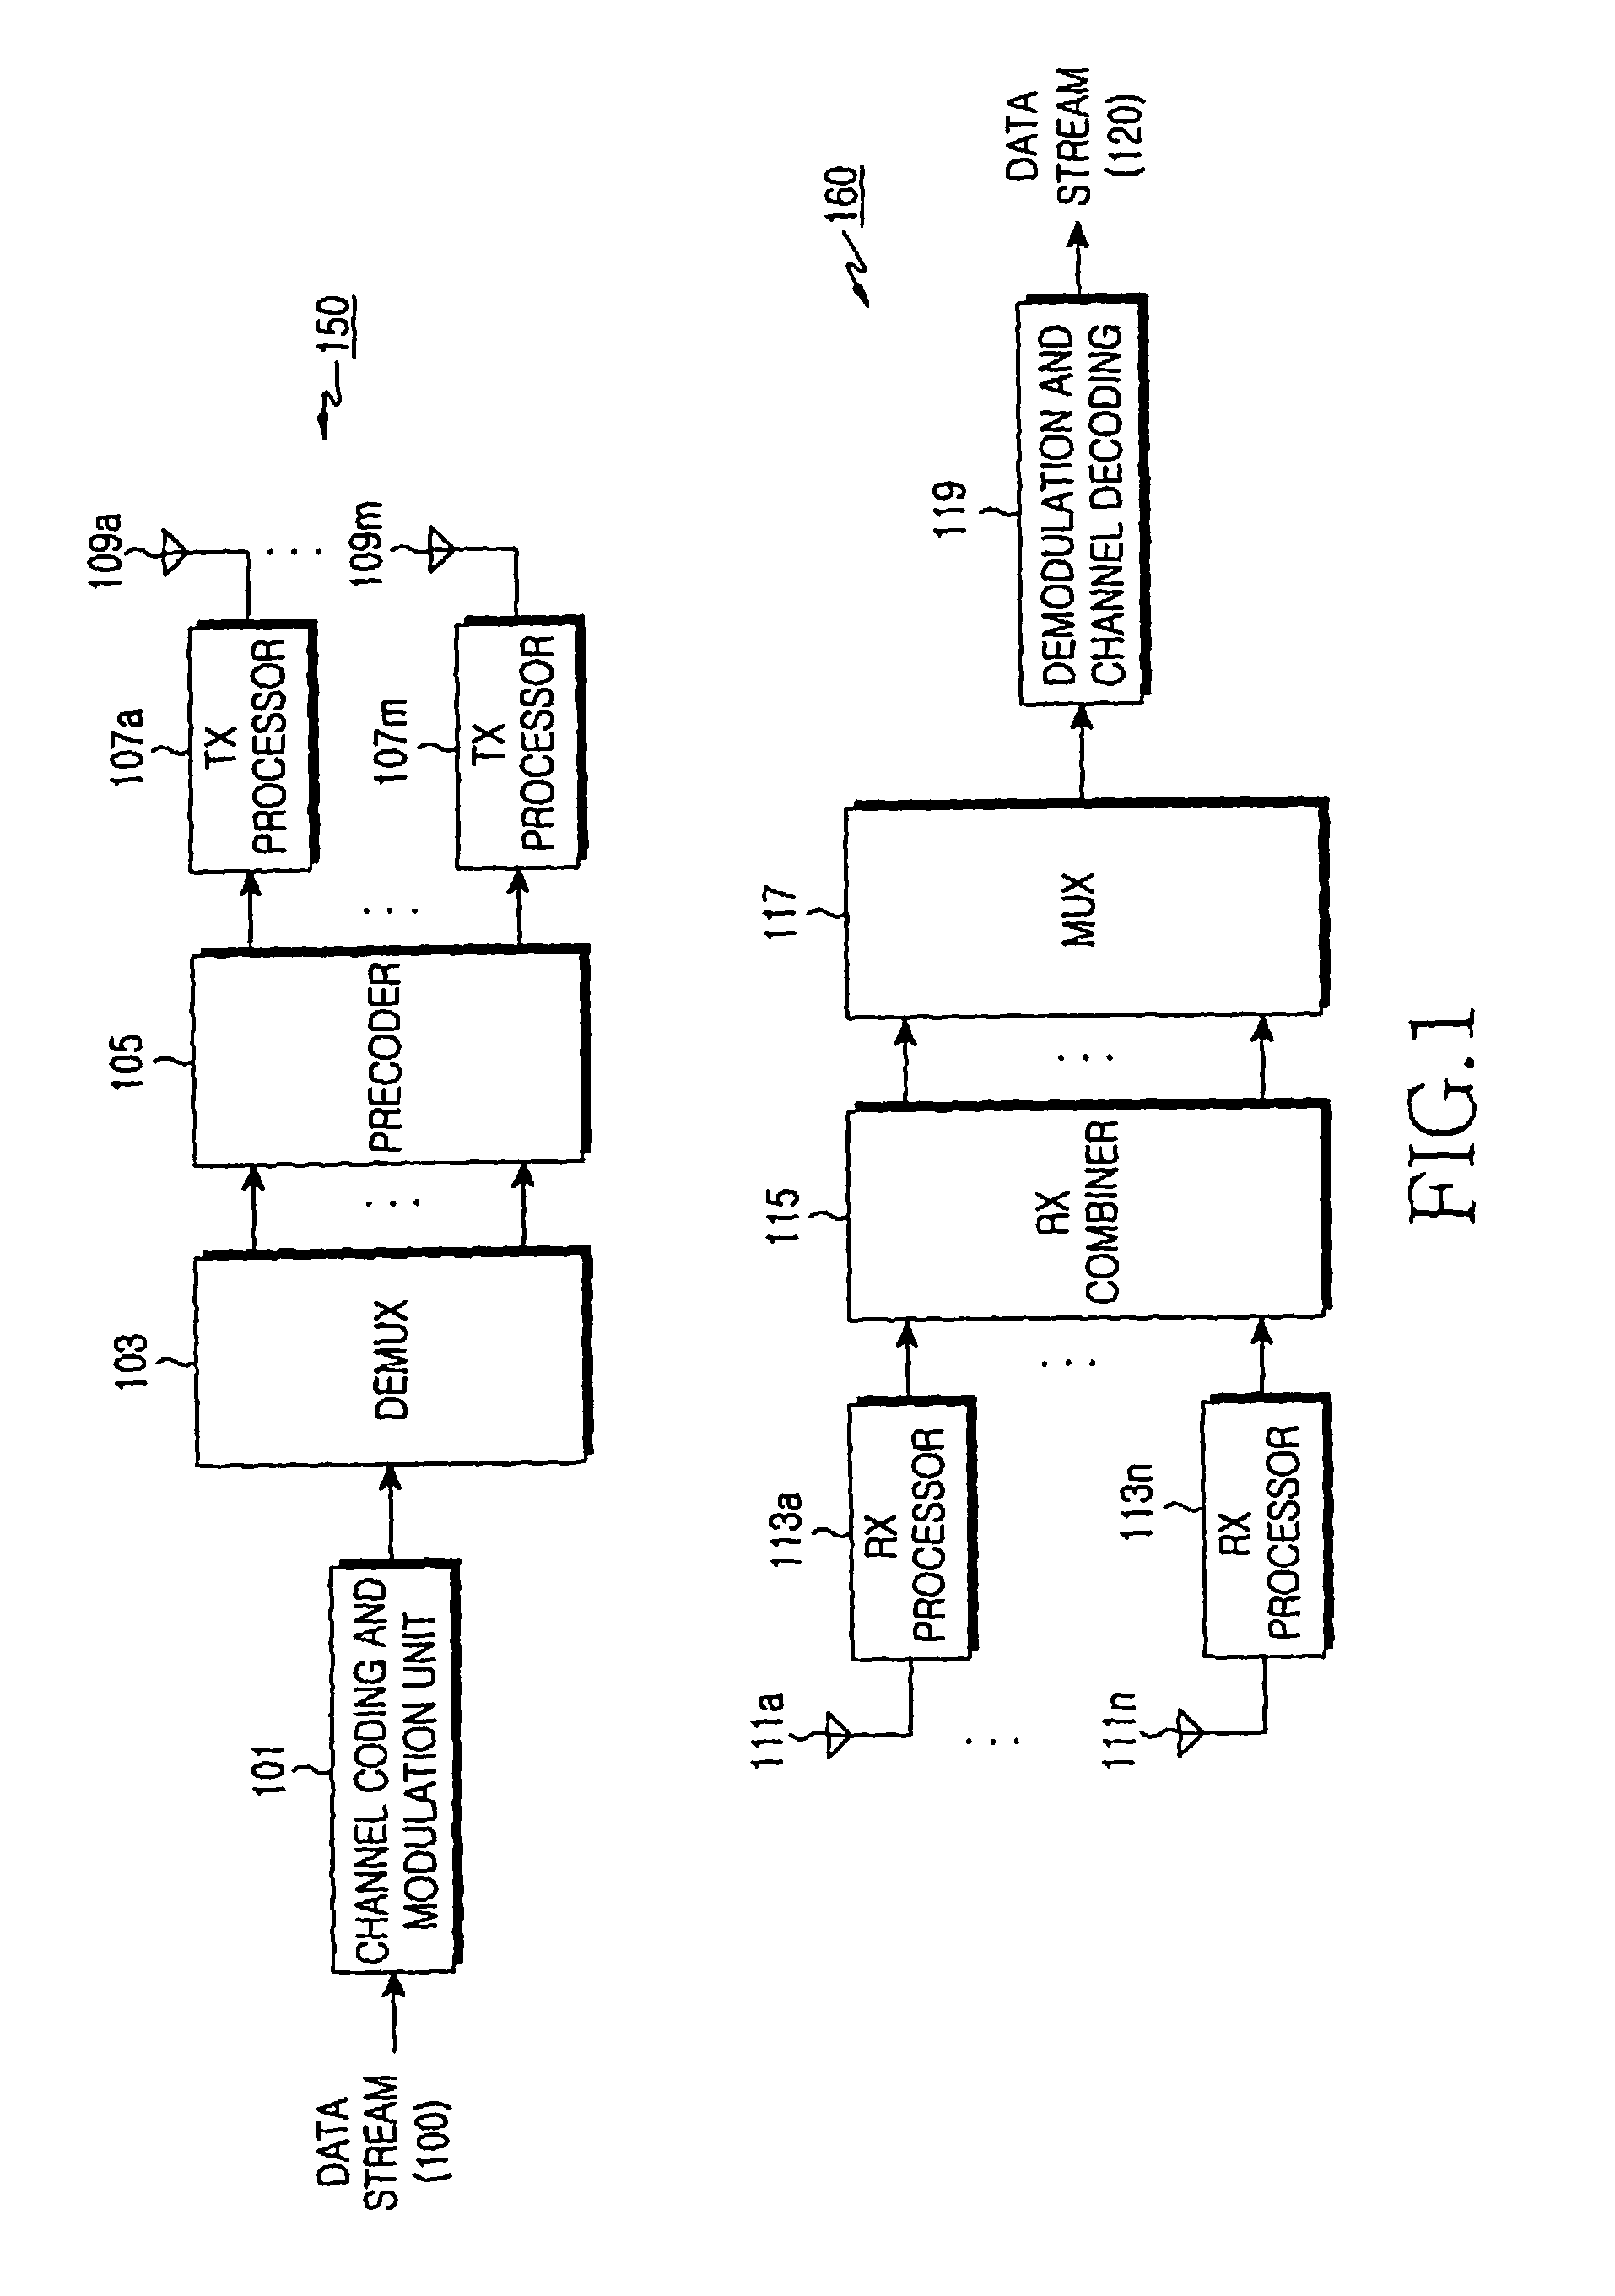 Method and apparatus for transmitting/receiving feedback information in mobile telecommunication using multiple input multiple output